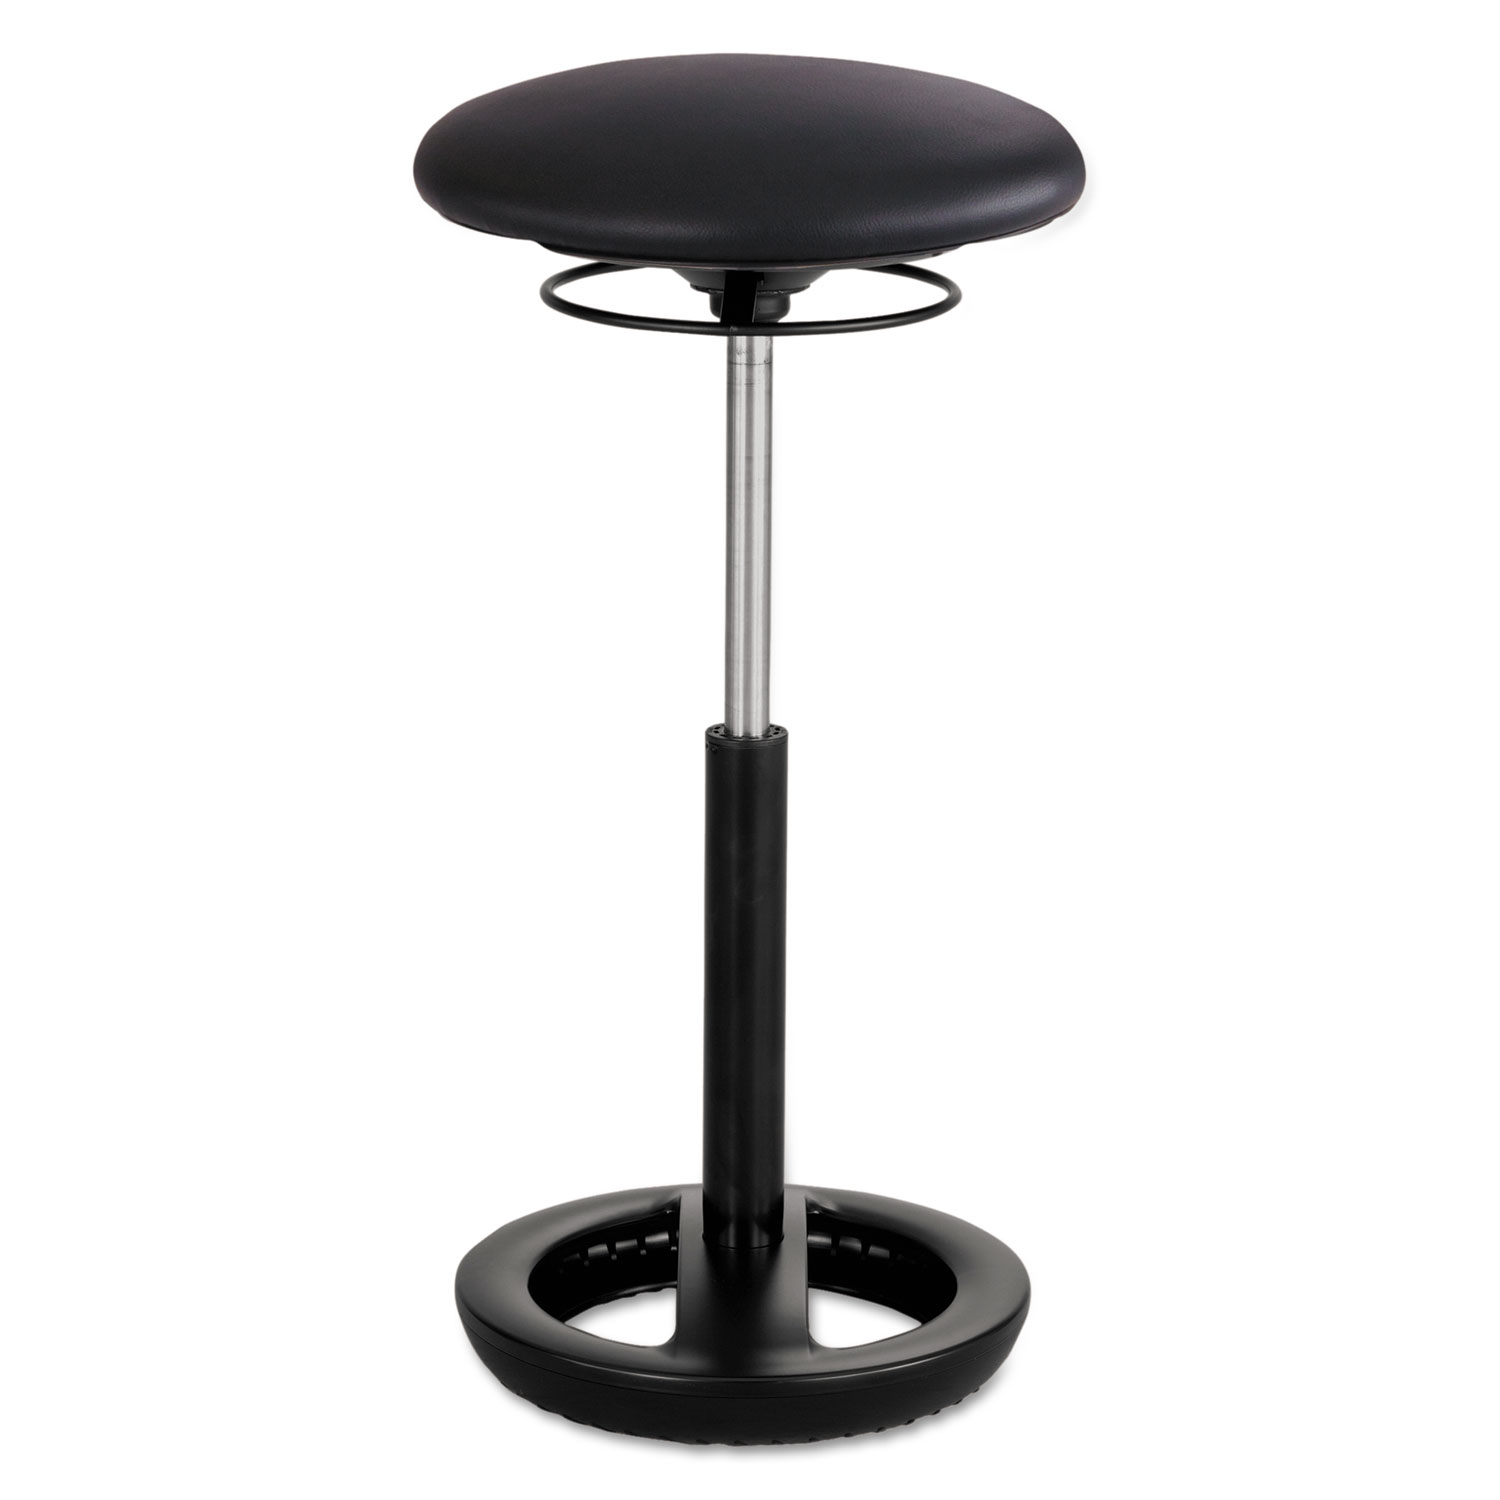 Twixt Extended-Height Ergonomic Chair, Supports up to 250 lbs., Black Seat/Black Back, Black Base